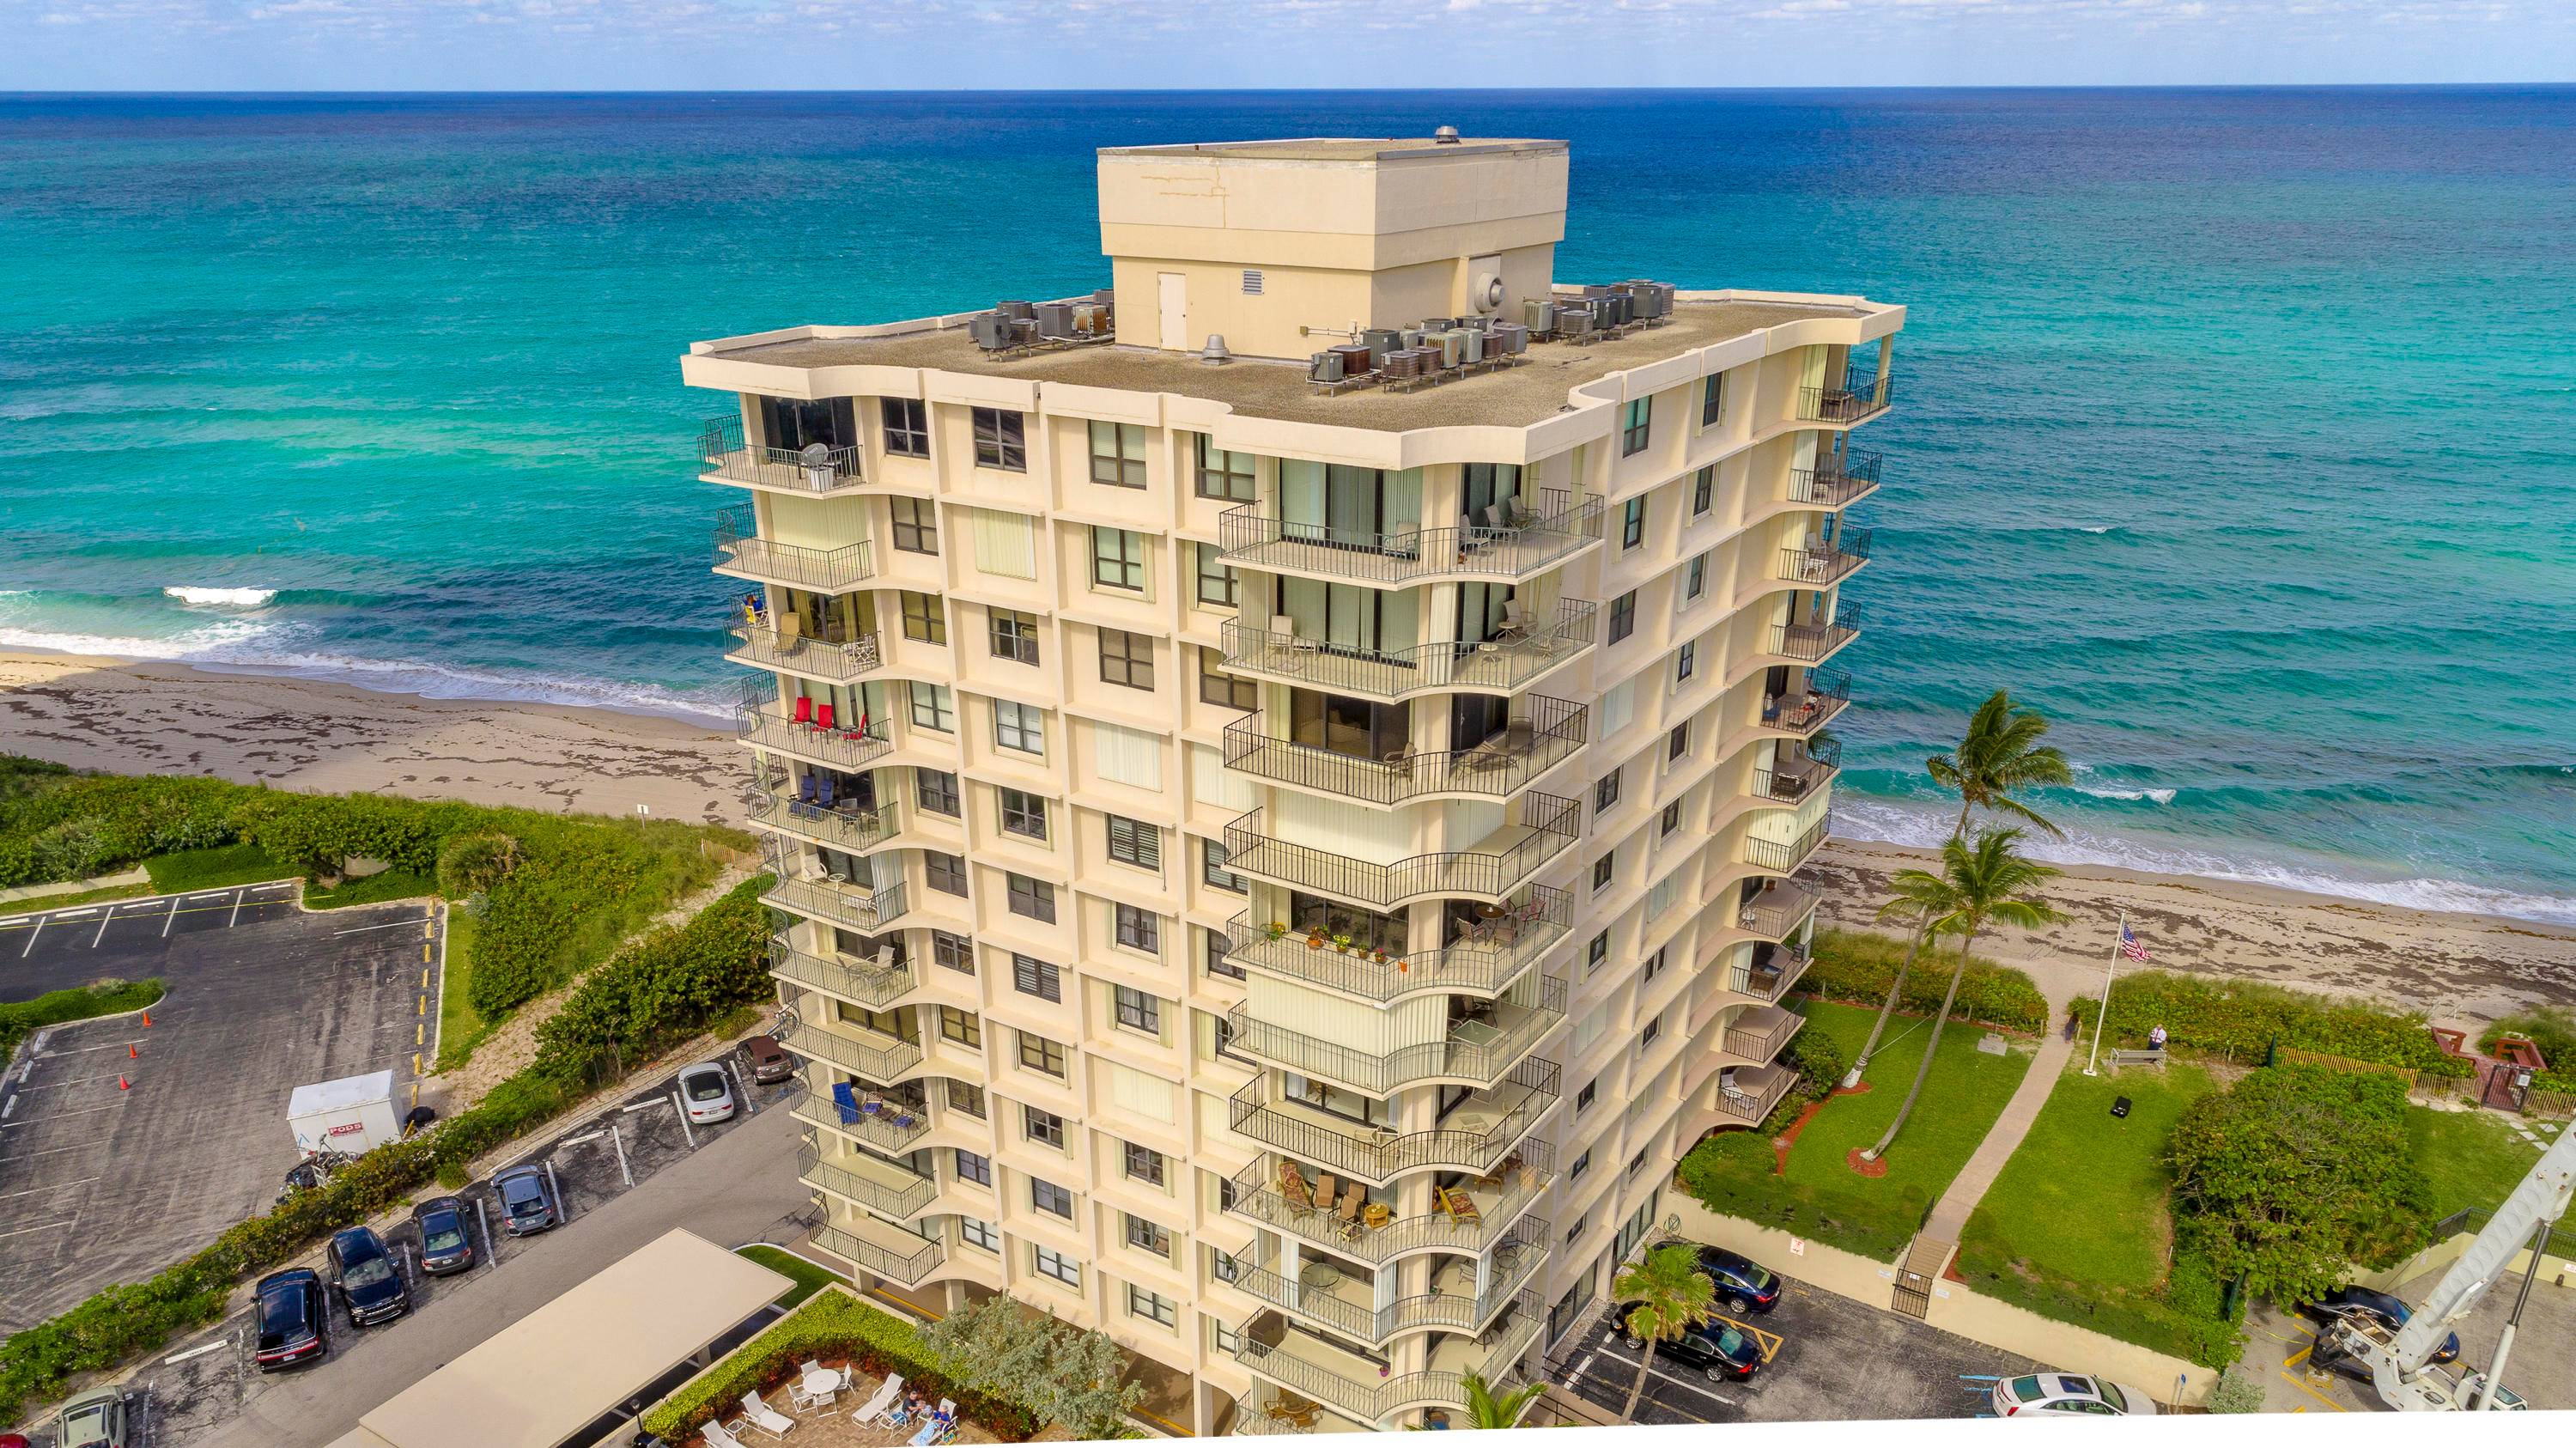 Stunning condo on Singer Island, available this upcoming season 2025.